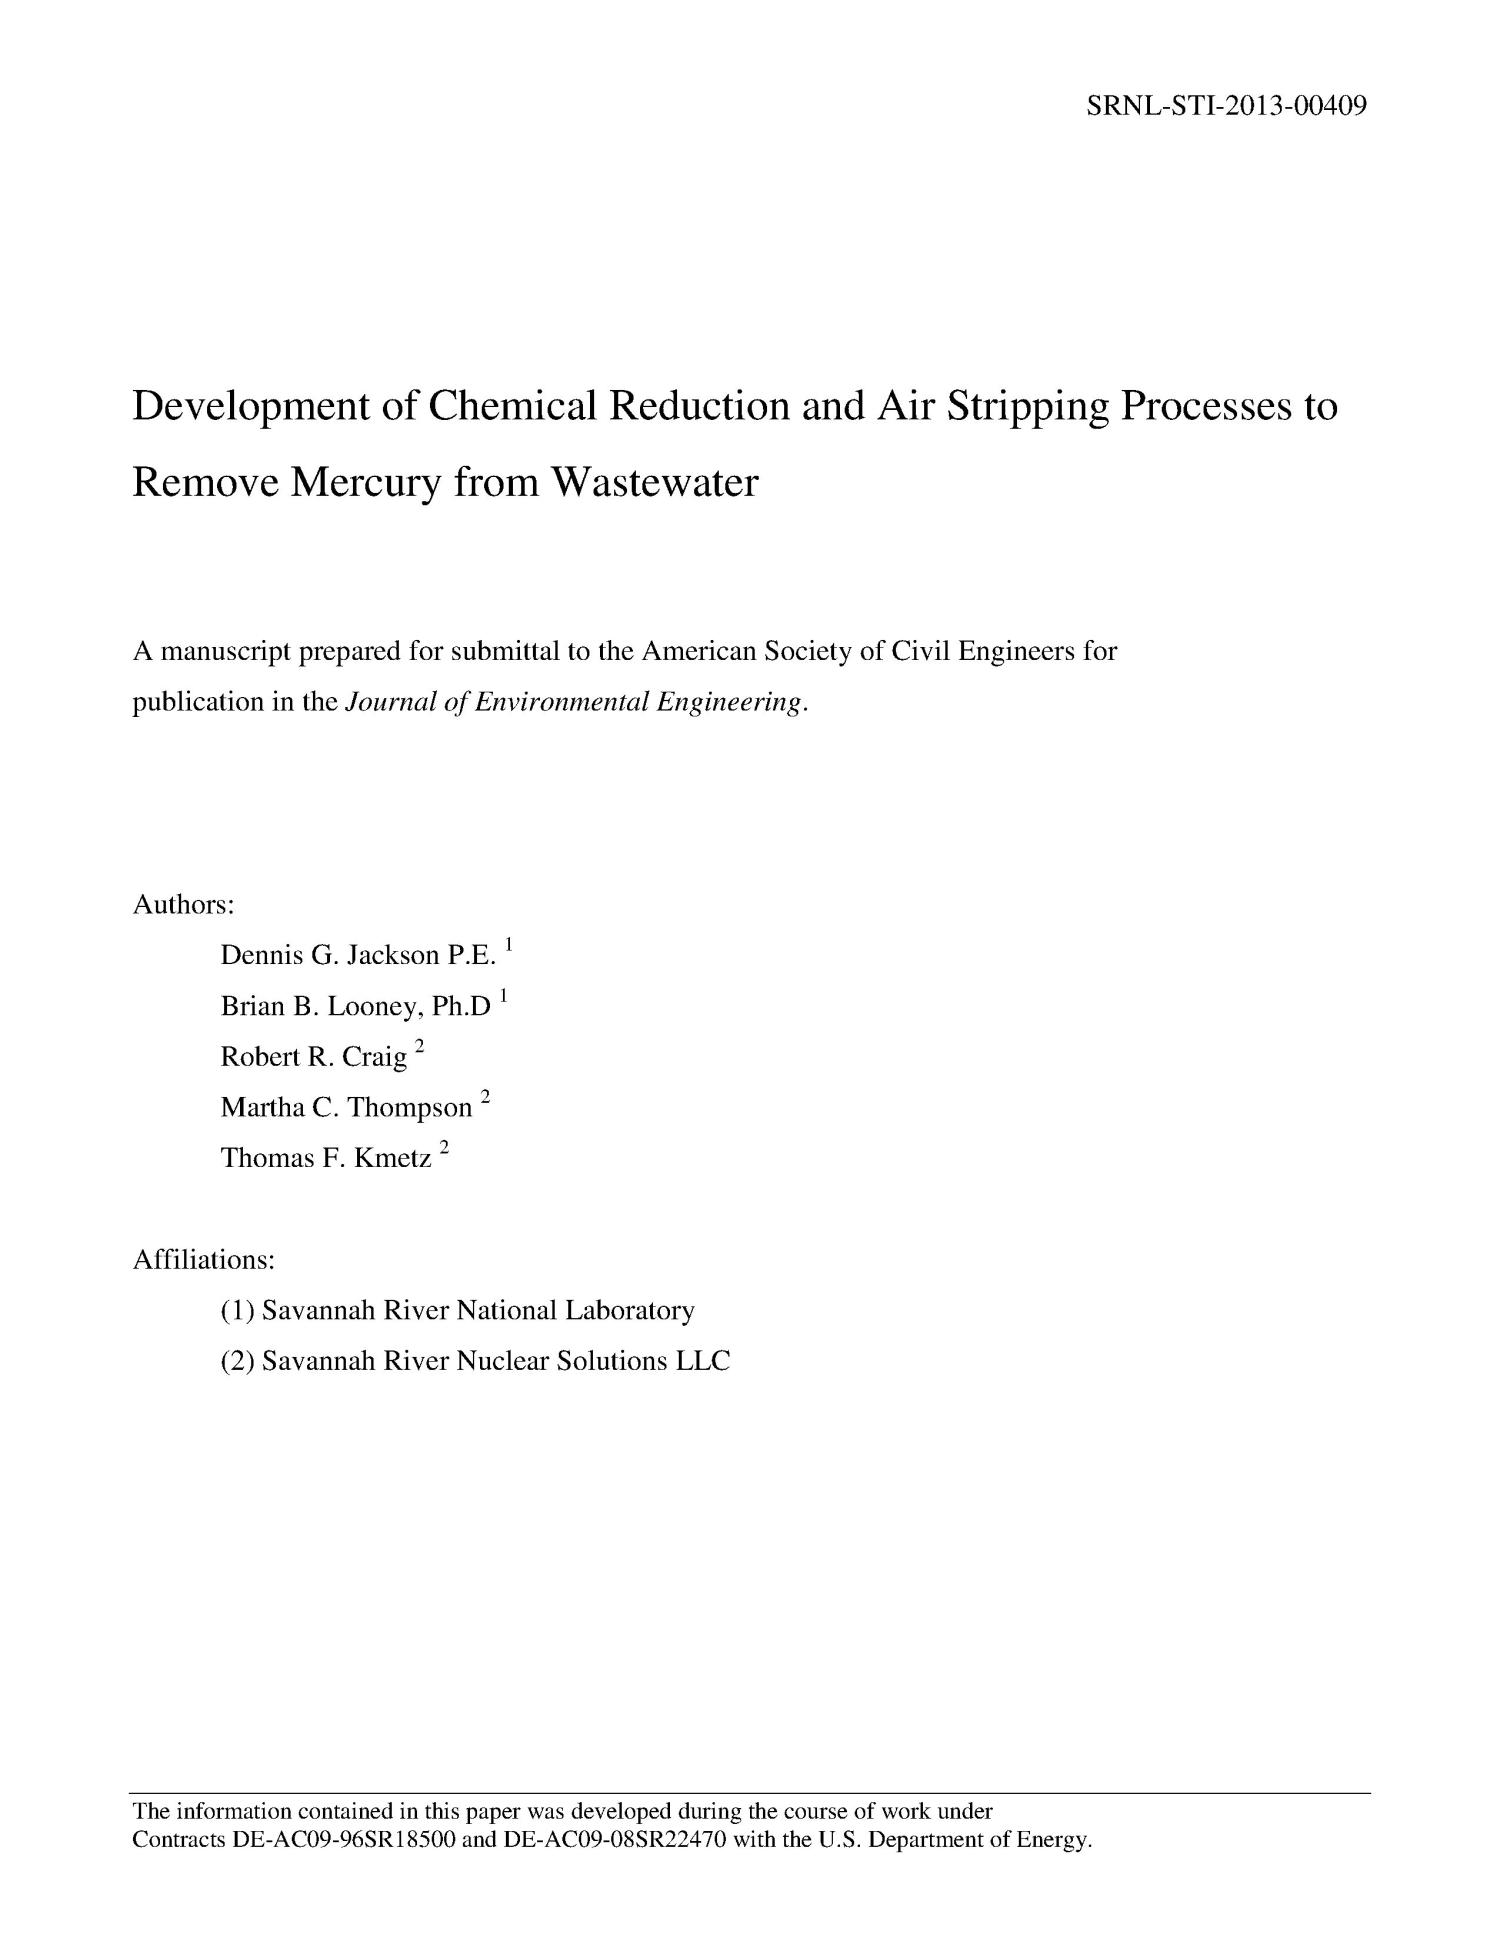 Development Of Chemical Reduction And Air Stripping Processes To Remove Mercury From Wastewater
                                                
                                                    [Sequence #]: 2 of 26
                                                